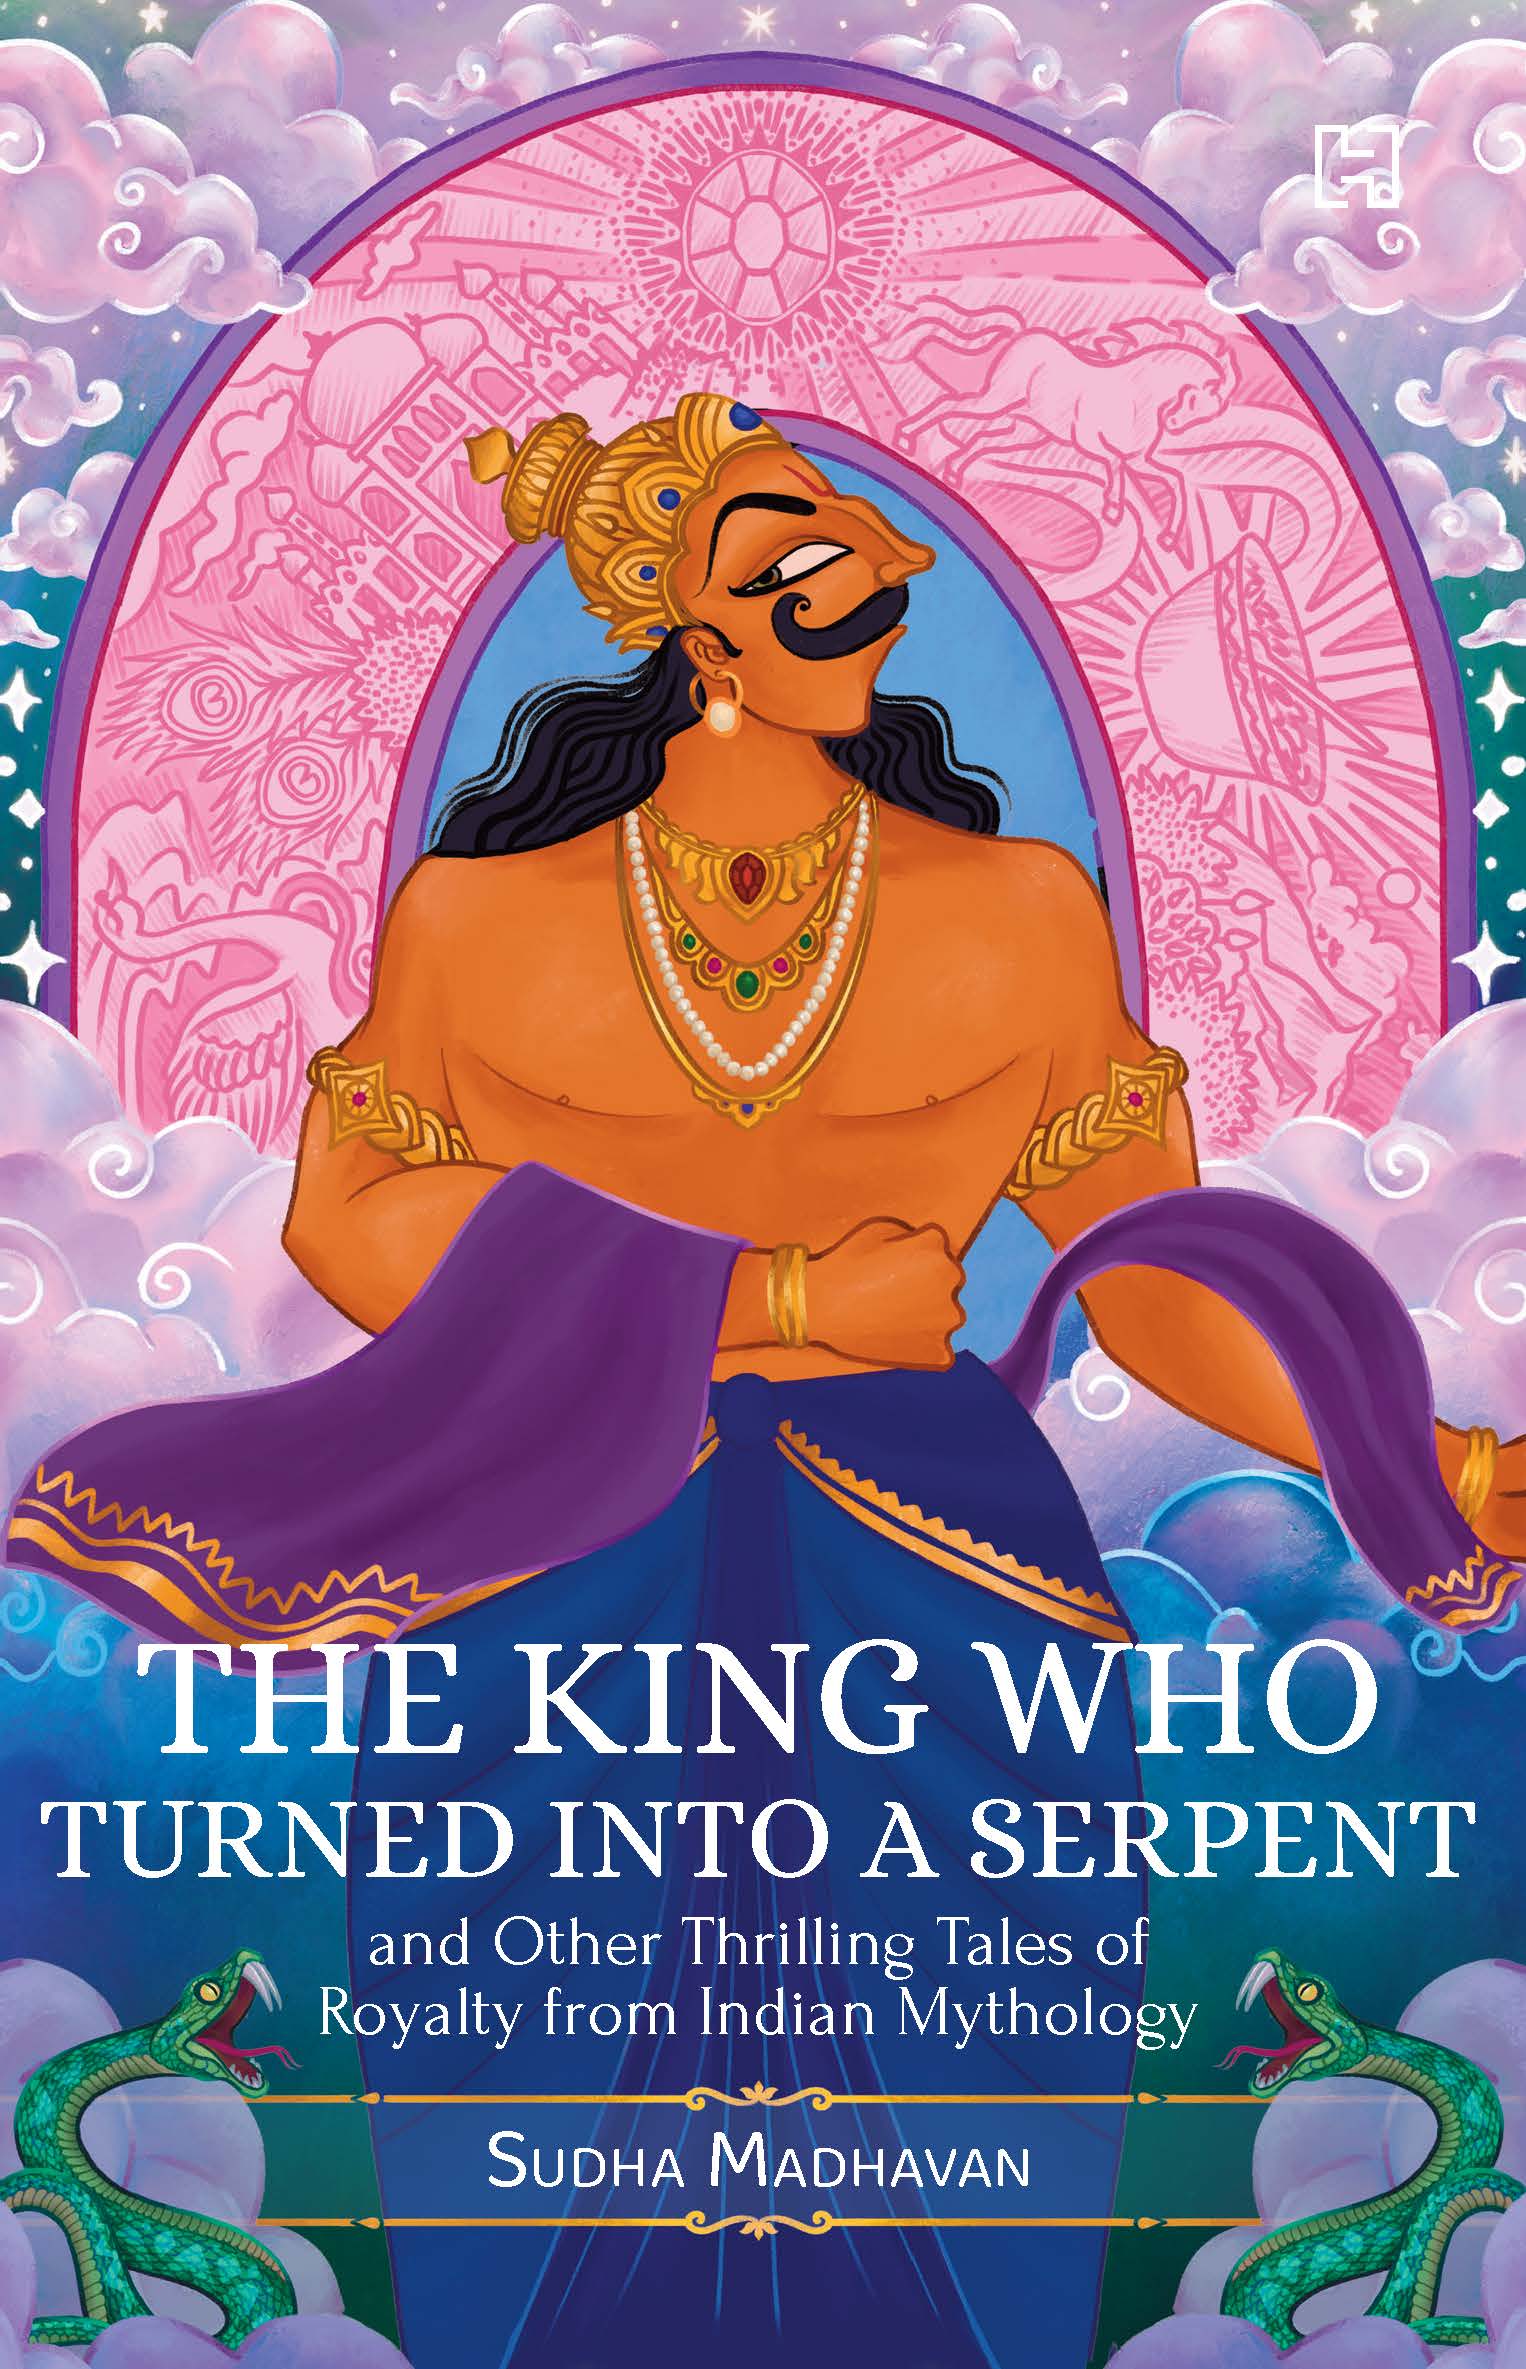 The King Who Turned Into a Serpent: and Other Thrilling Tales of Royalty from Indian Mythology